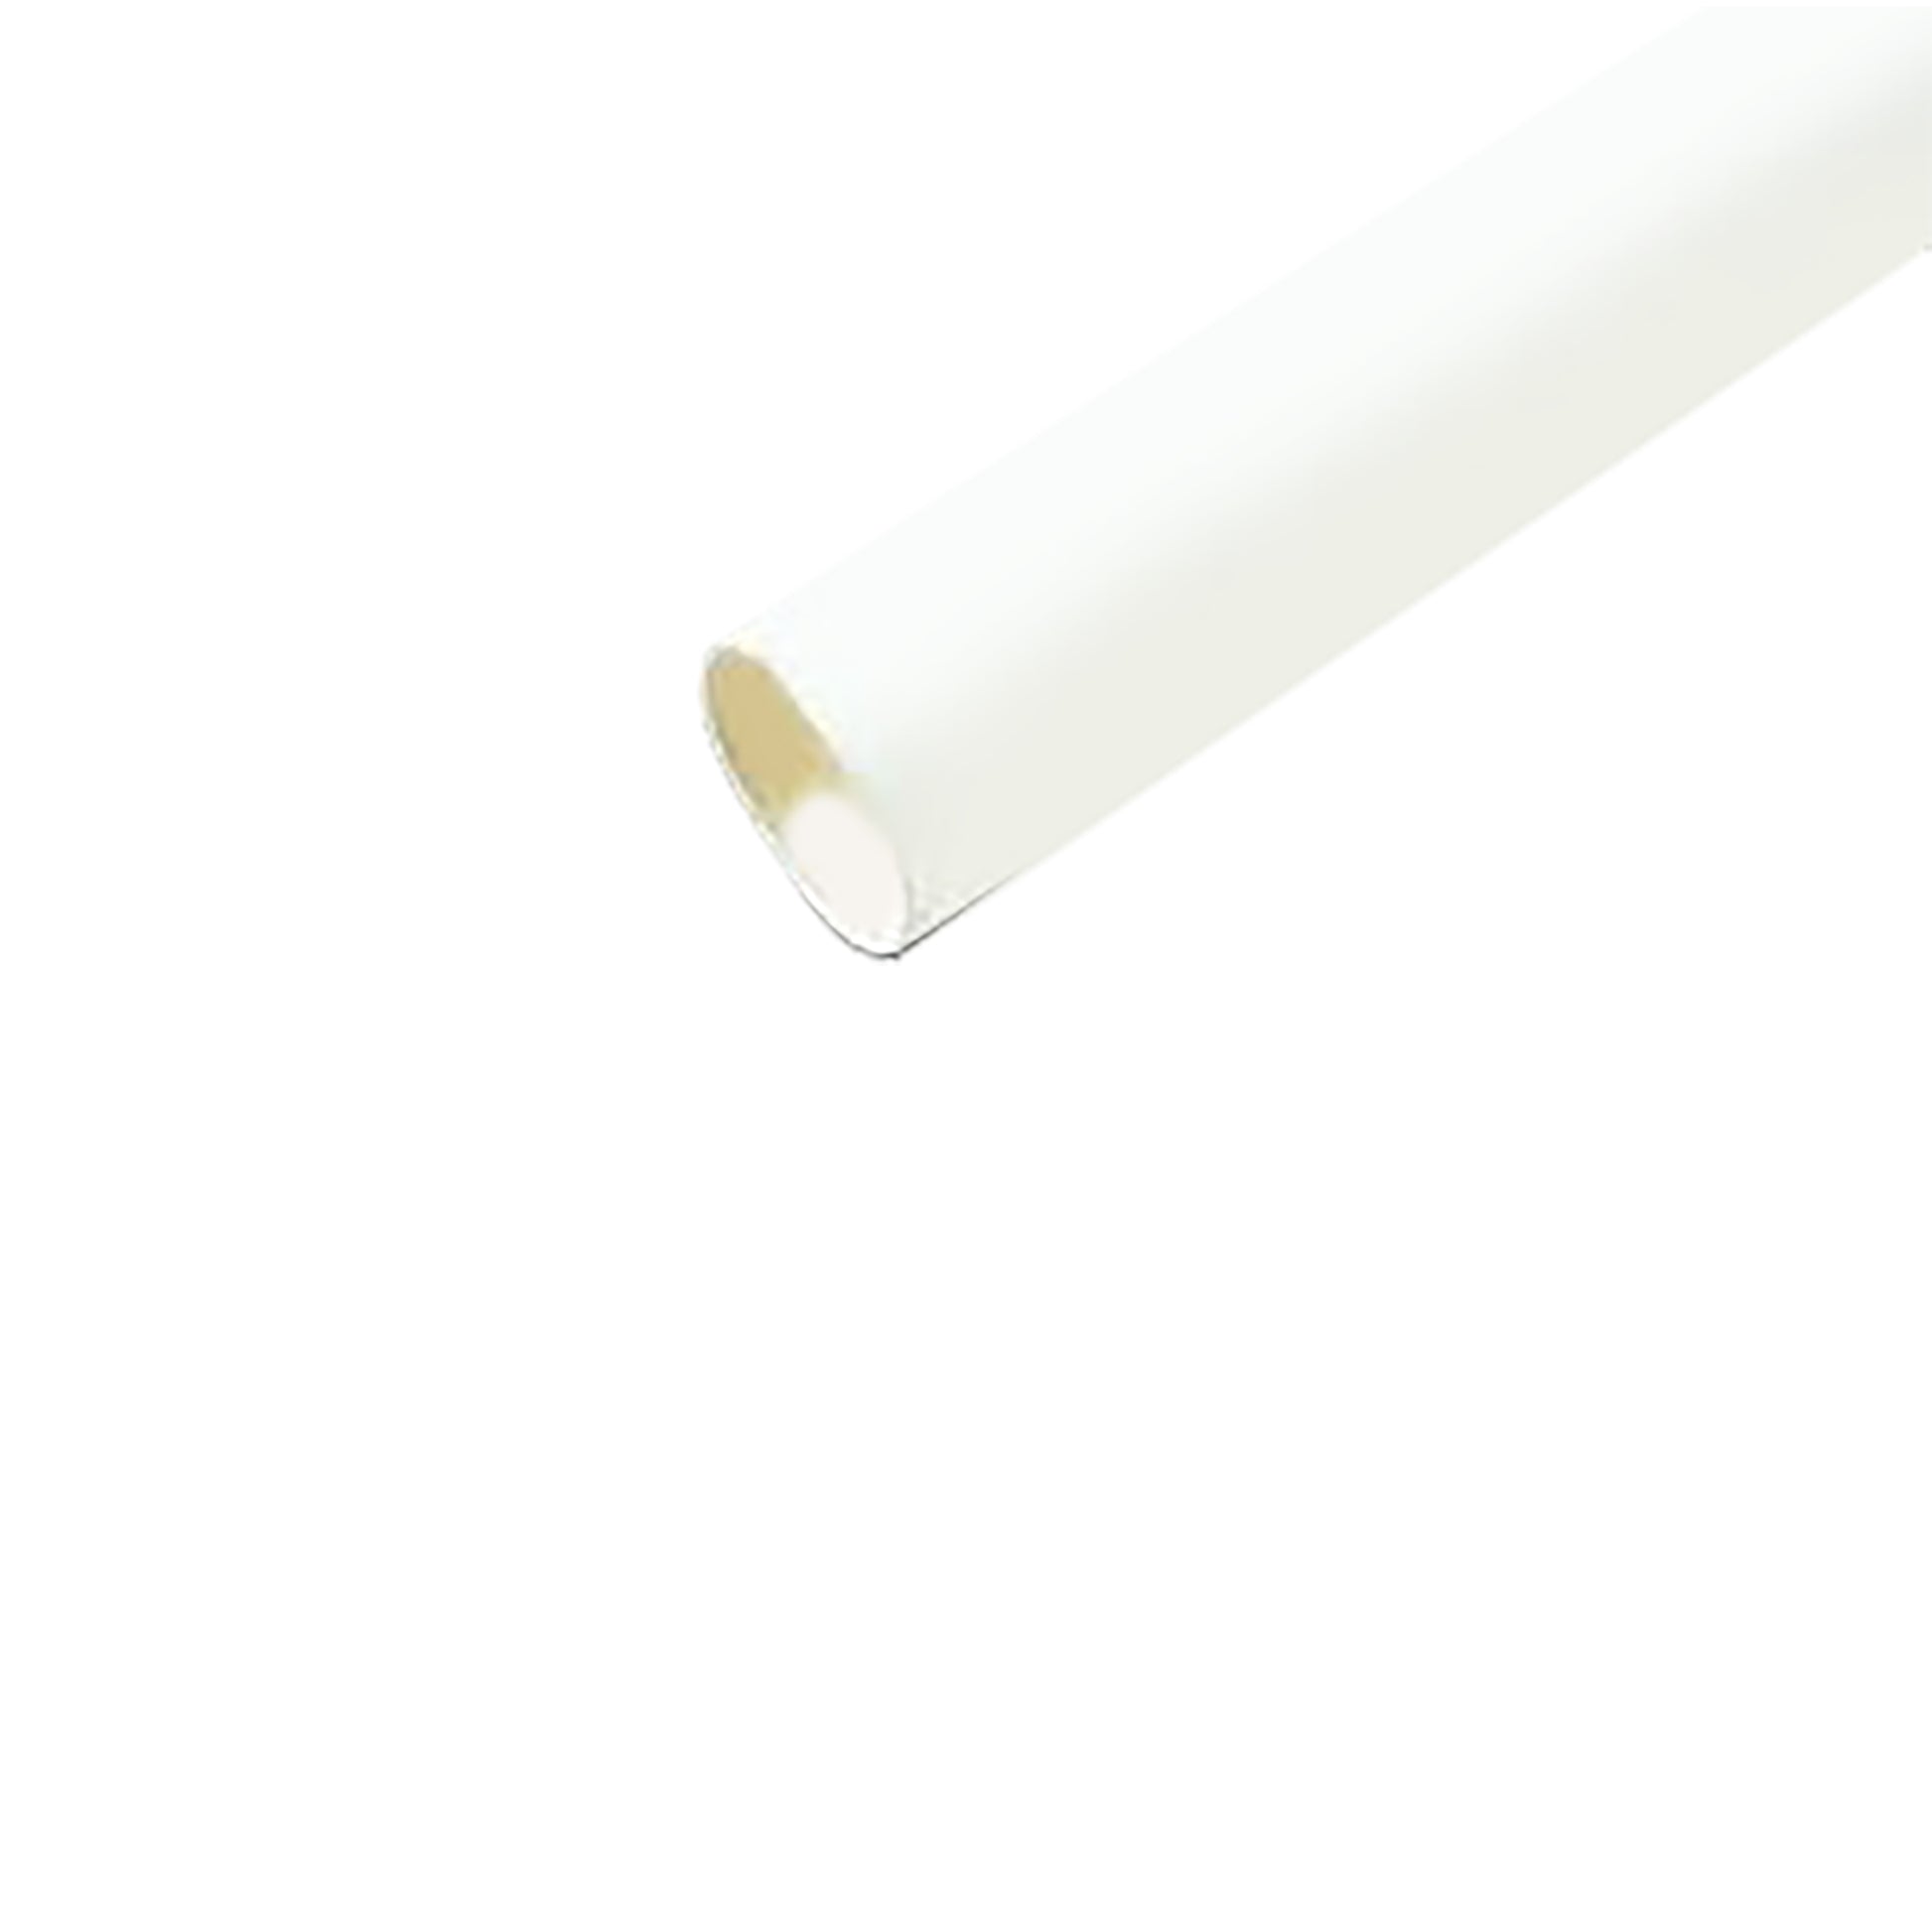 Flexible Thin Single Wall Non-Adhesive Heat Shrink Tubing 2:1 White 1/4" ID - 12" Inch 10 Pack